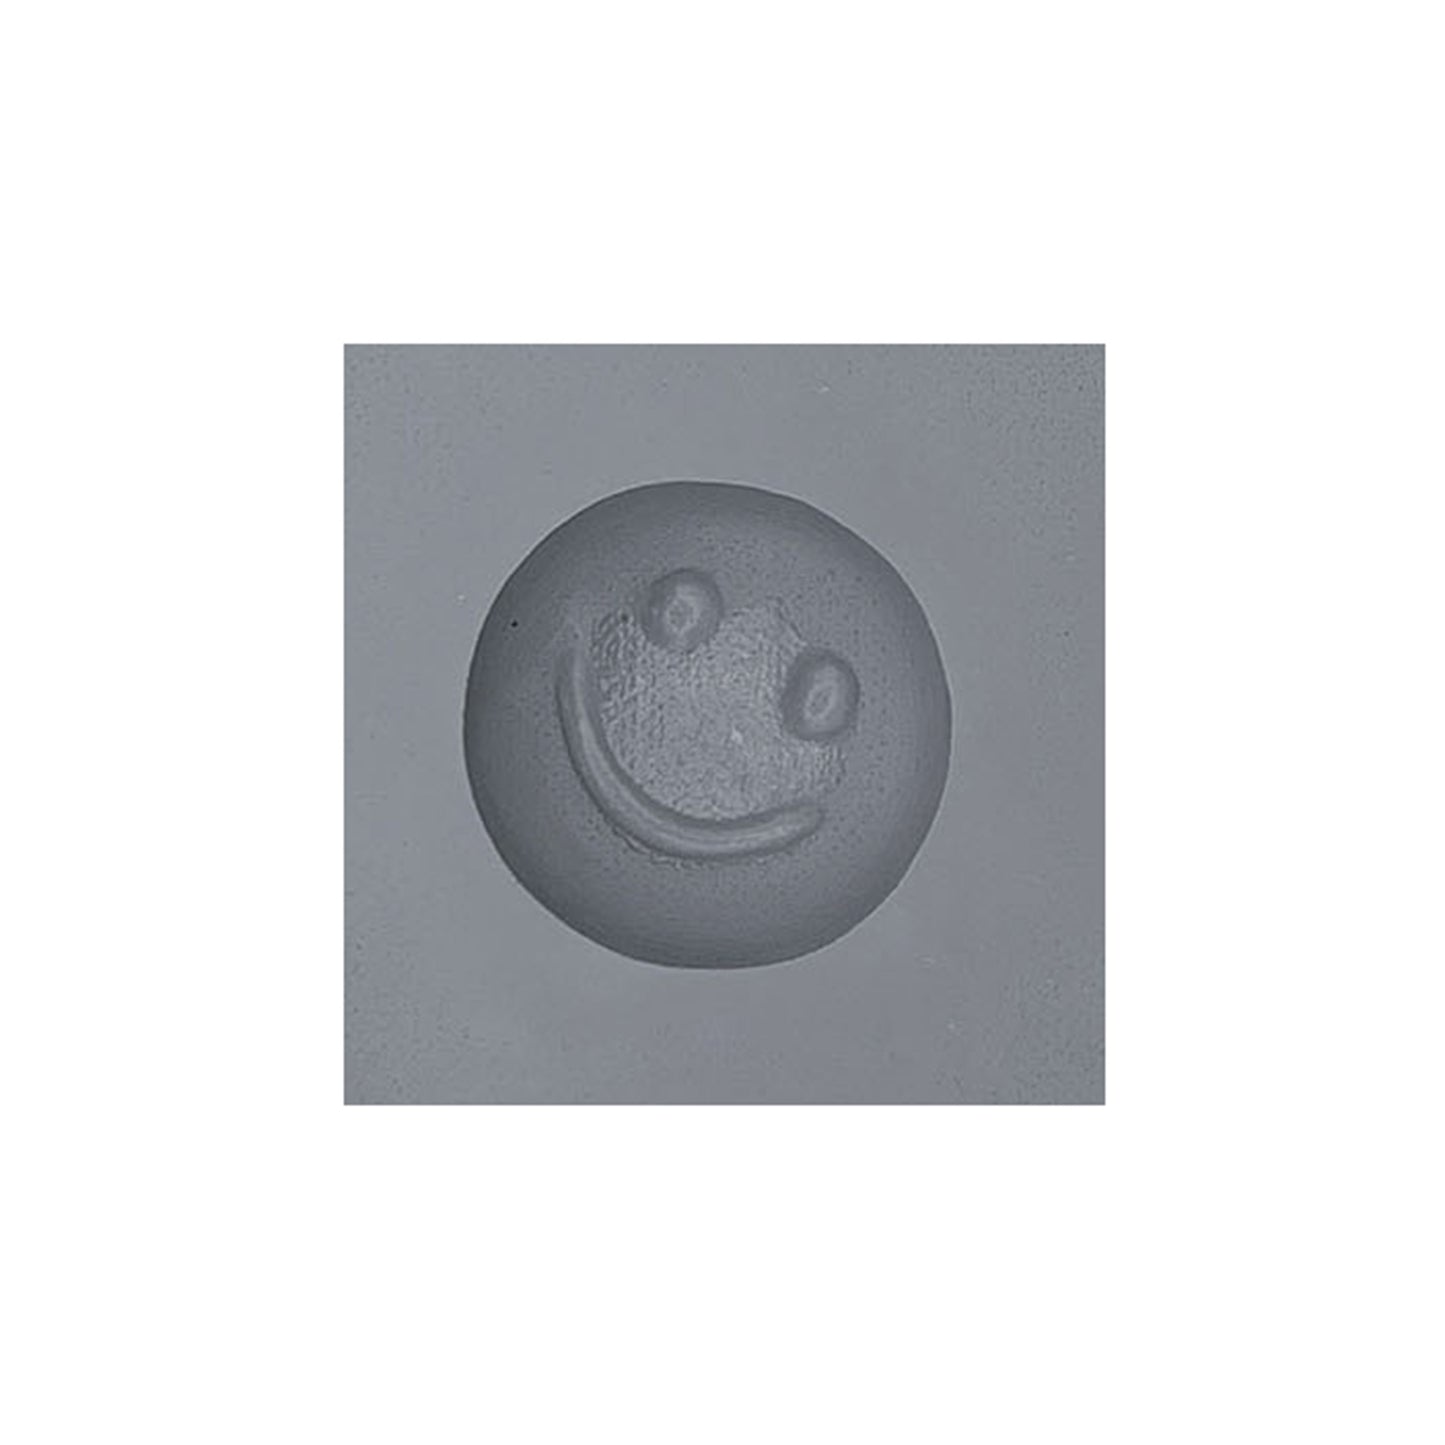 Smiley Face Mint Mold